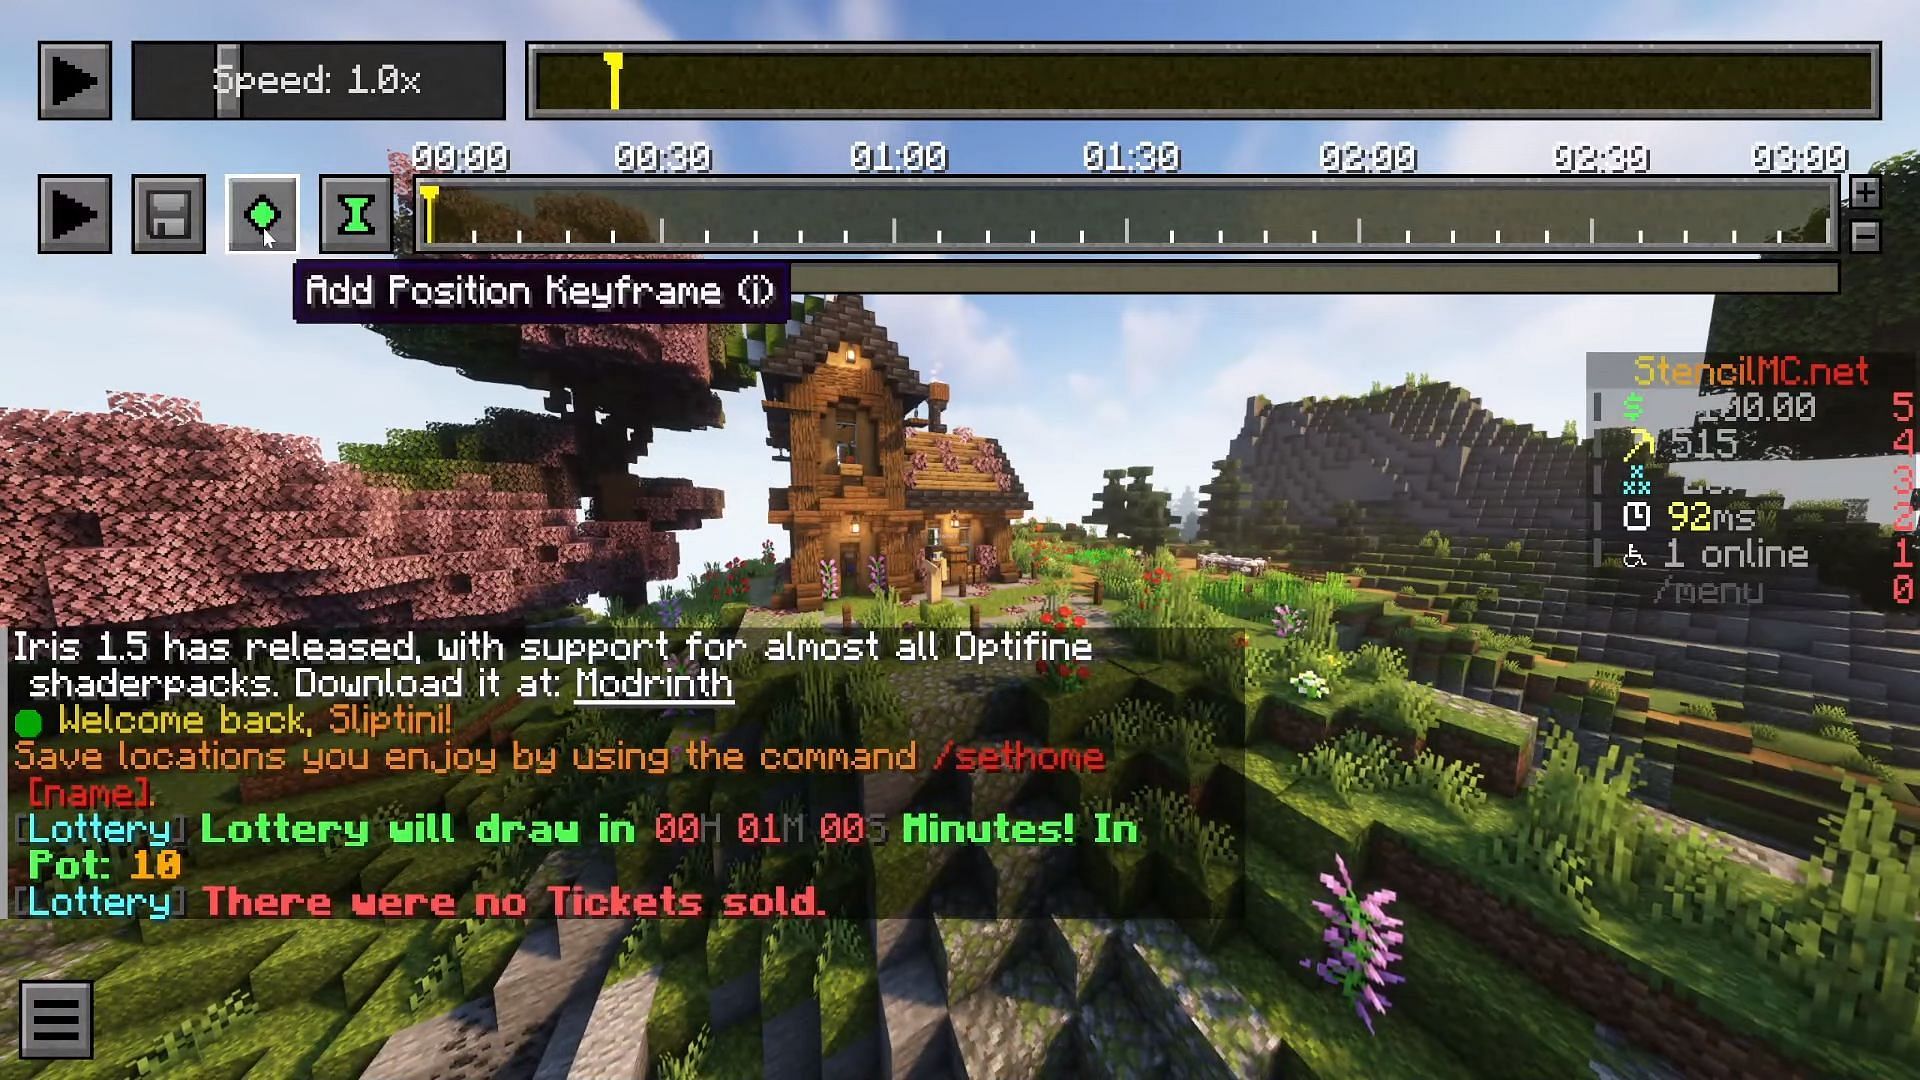 Players can use external recording software or the replay mod to record Minecraft. (Image via YouTube/Sliptini)